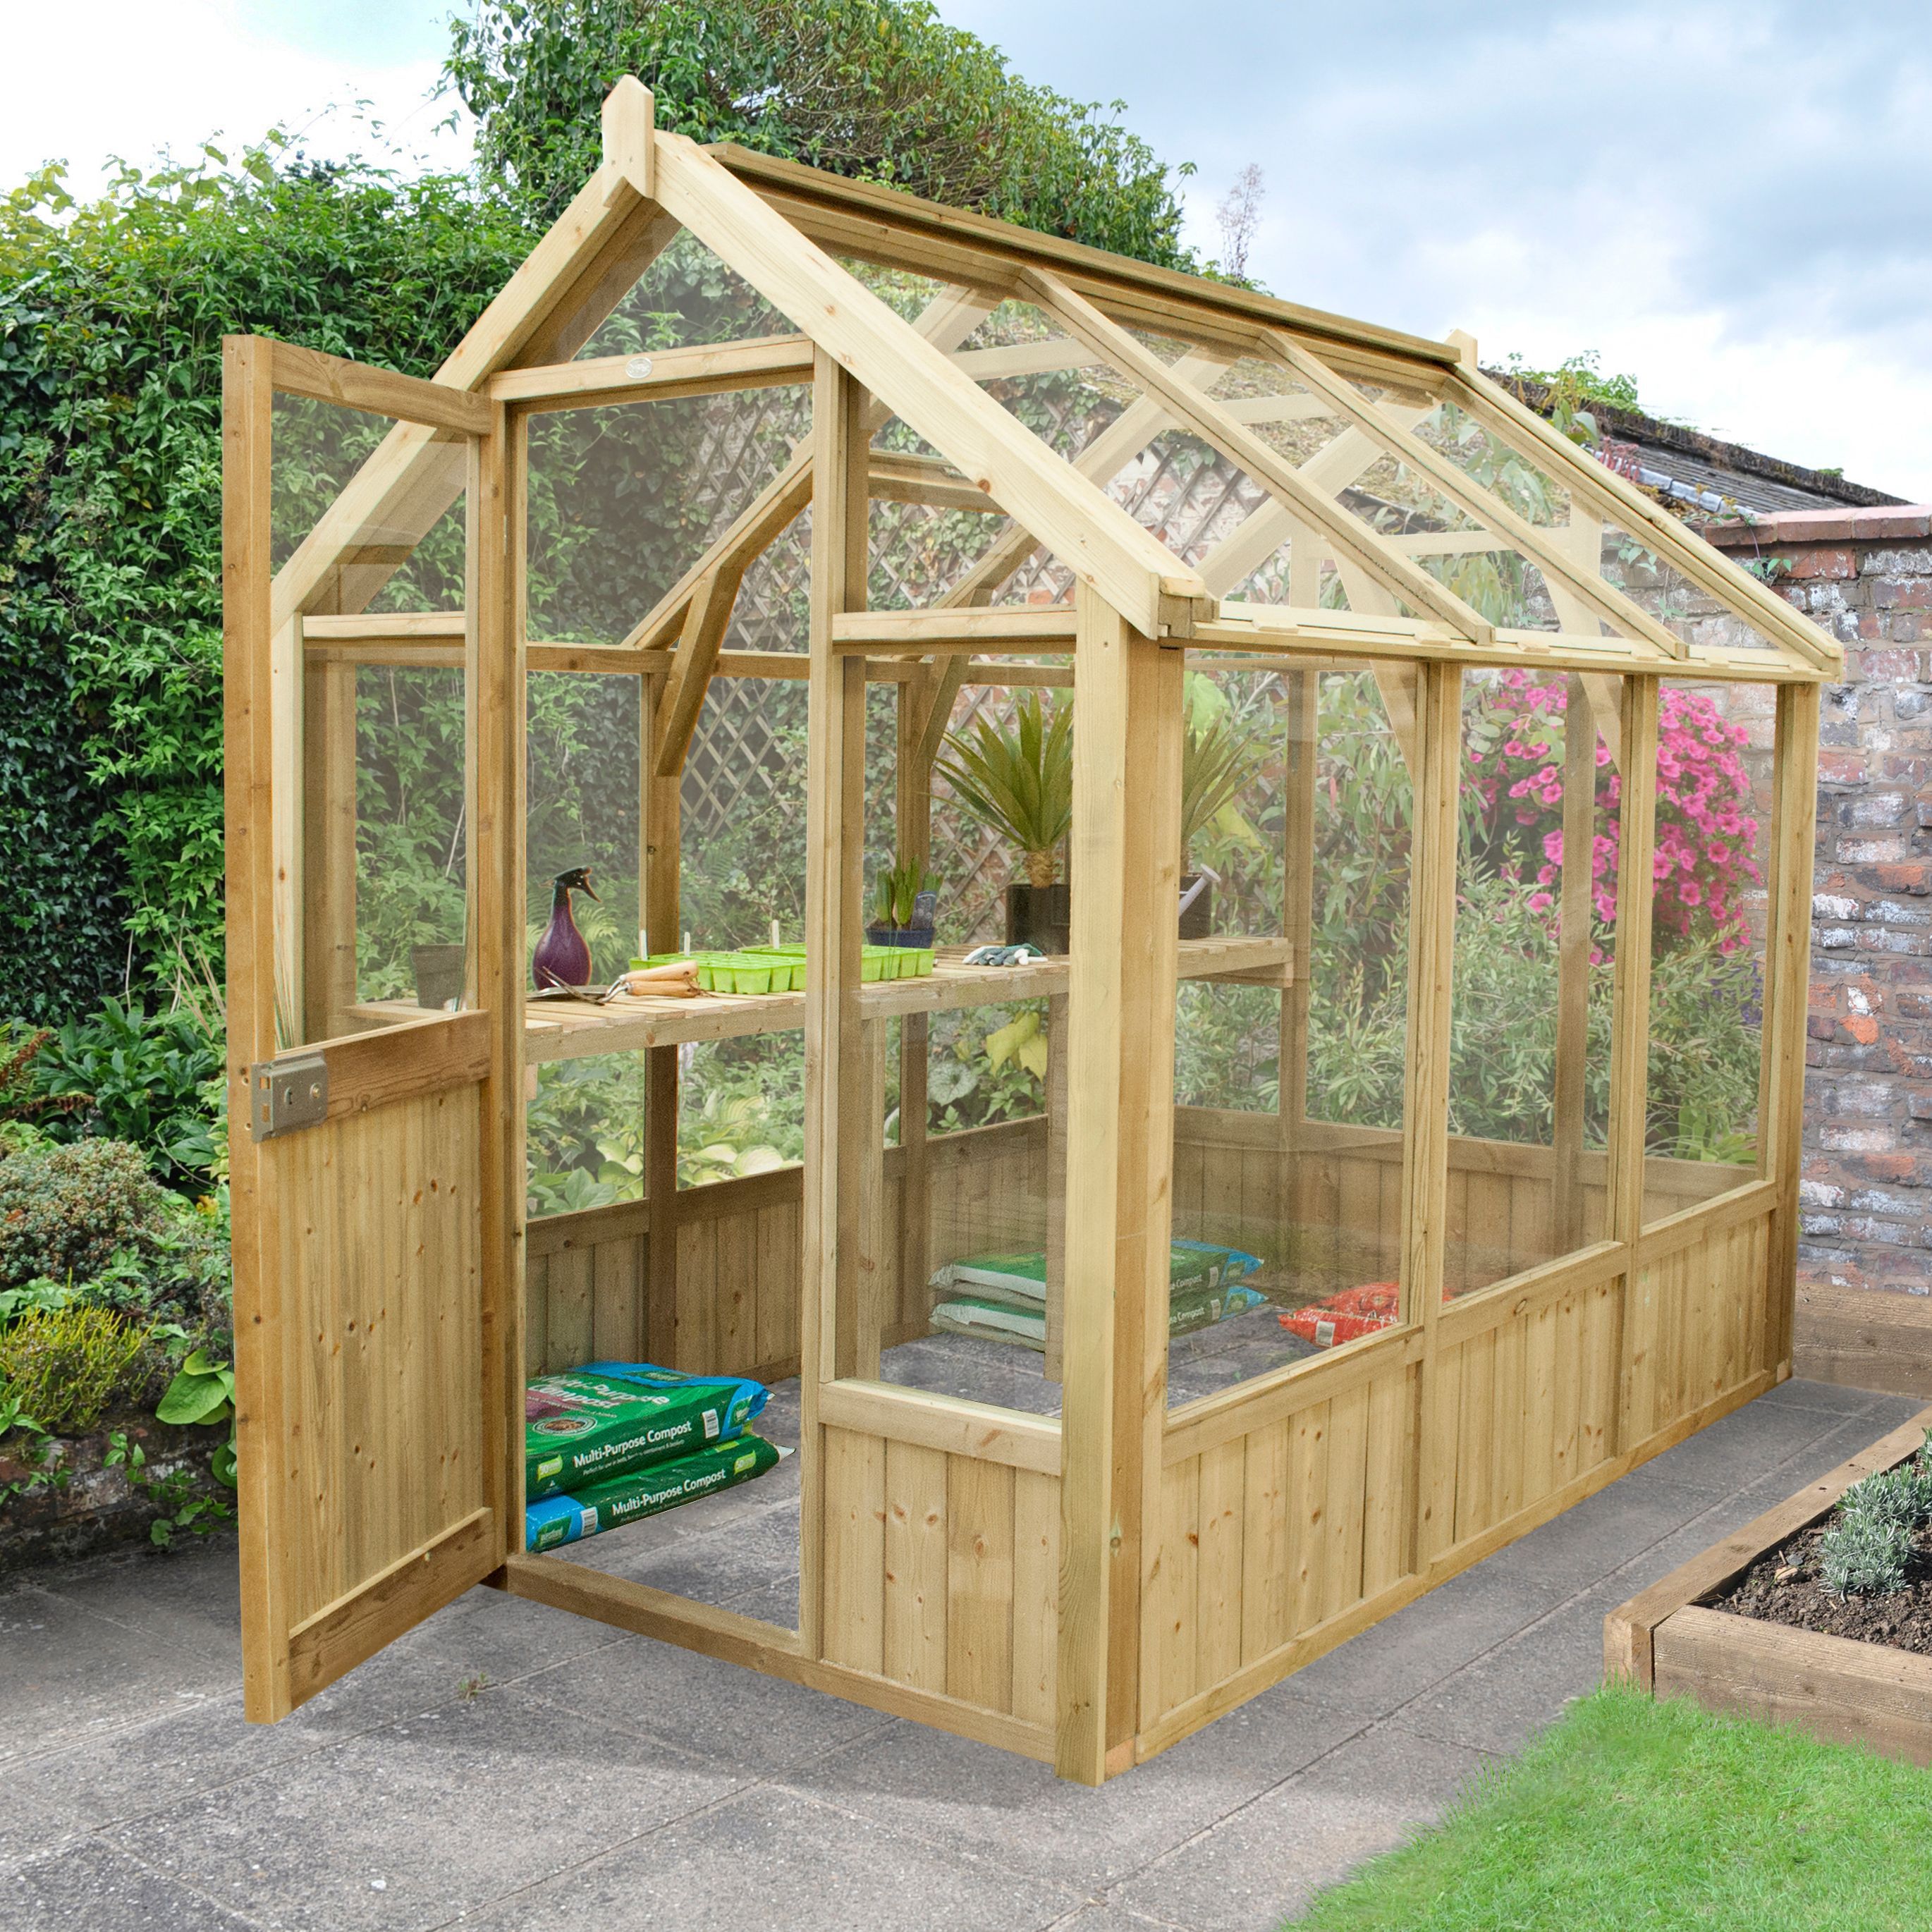 Forest Garden Vale Natural timber 8x6 Greenhouse